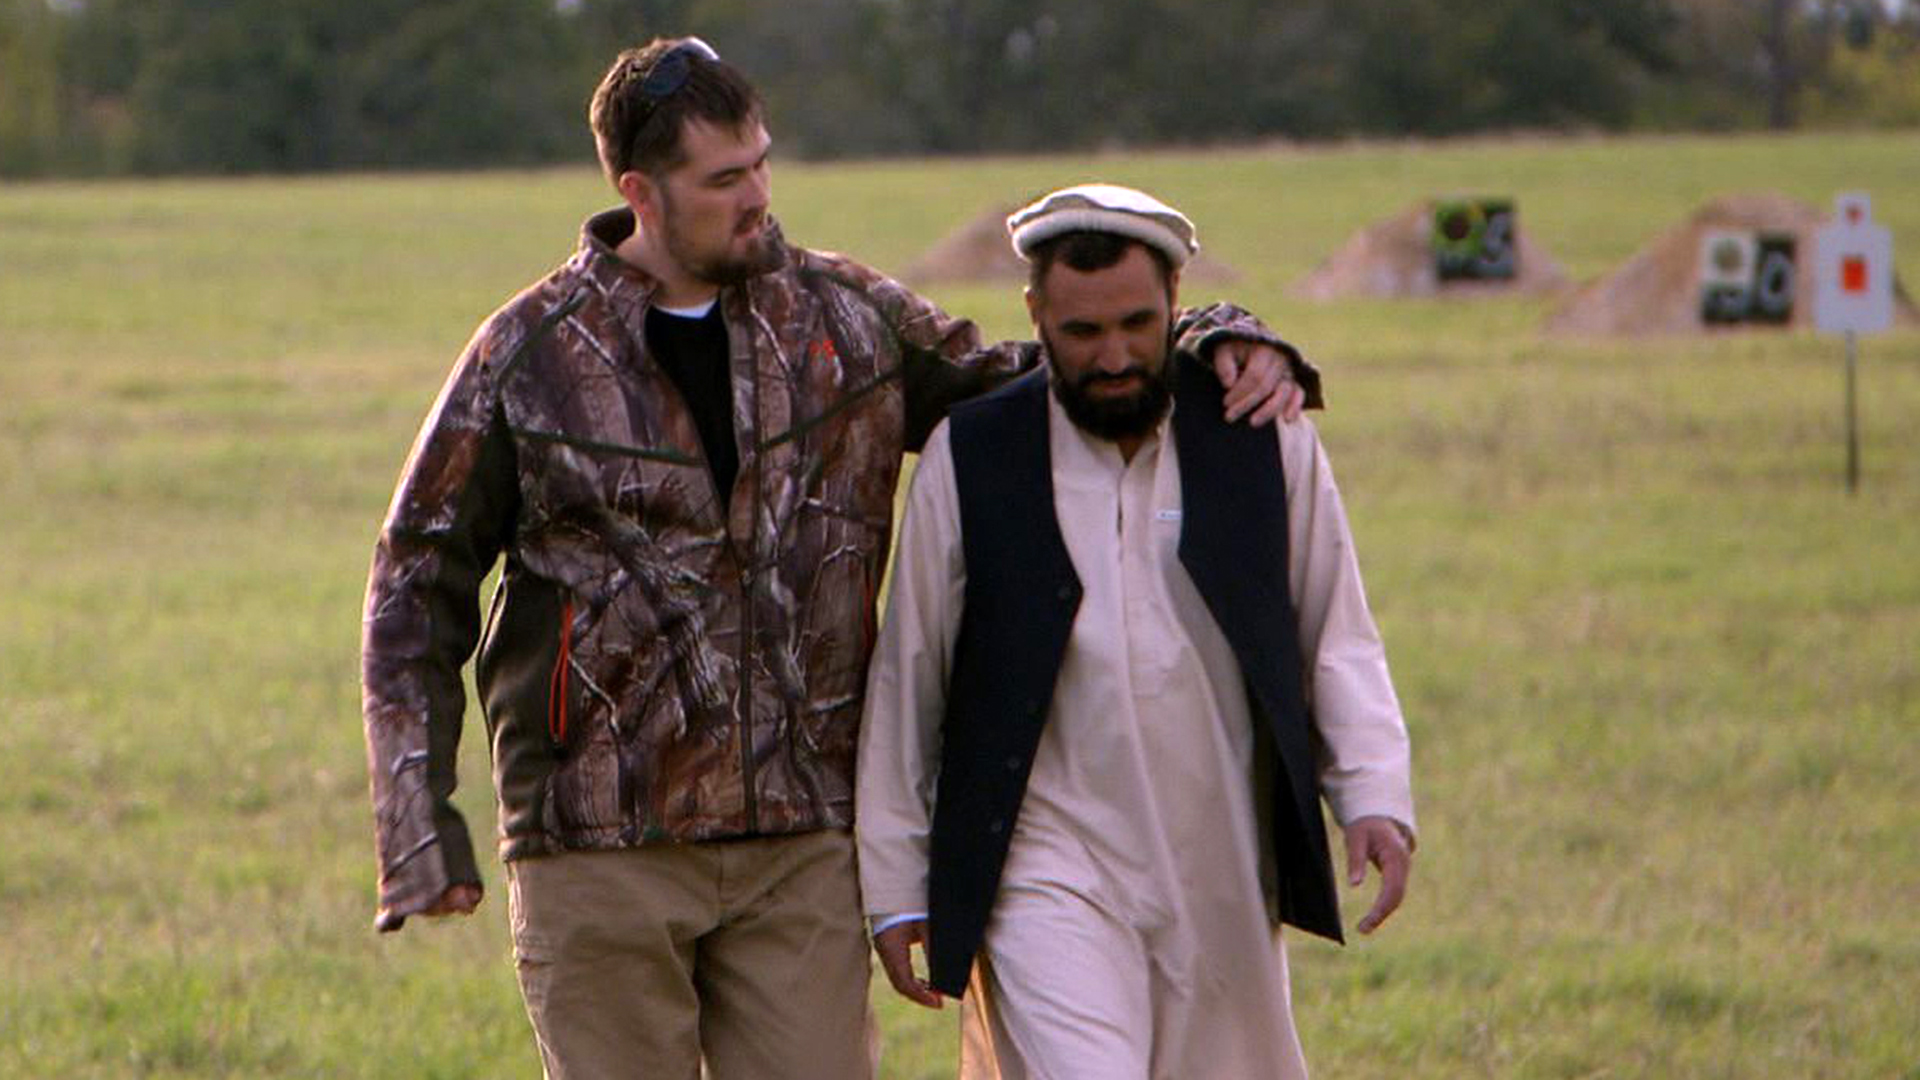 Marcus Luttrell Is the Lone Survivor